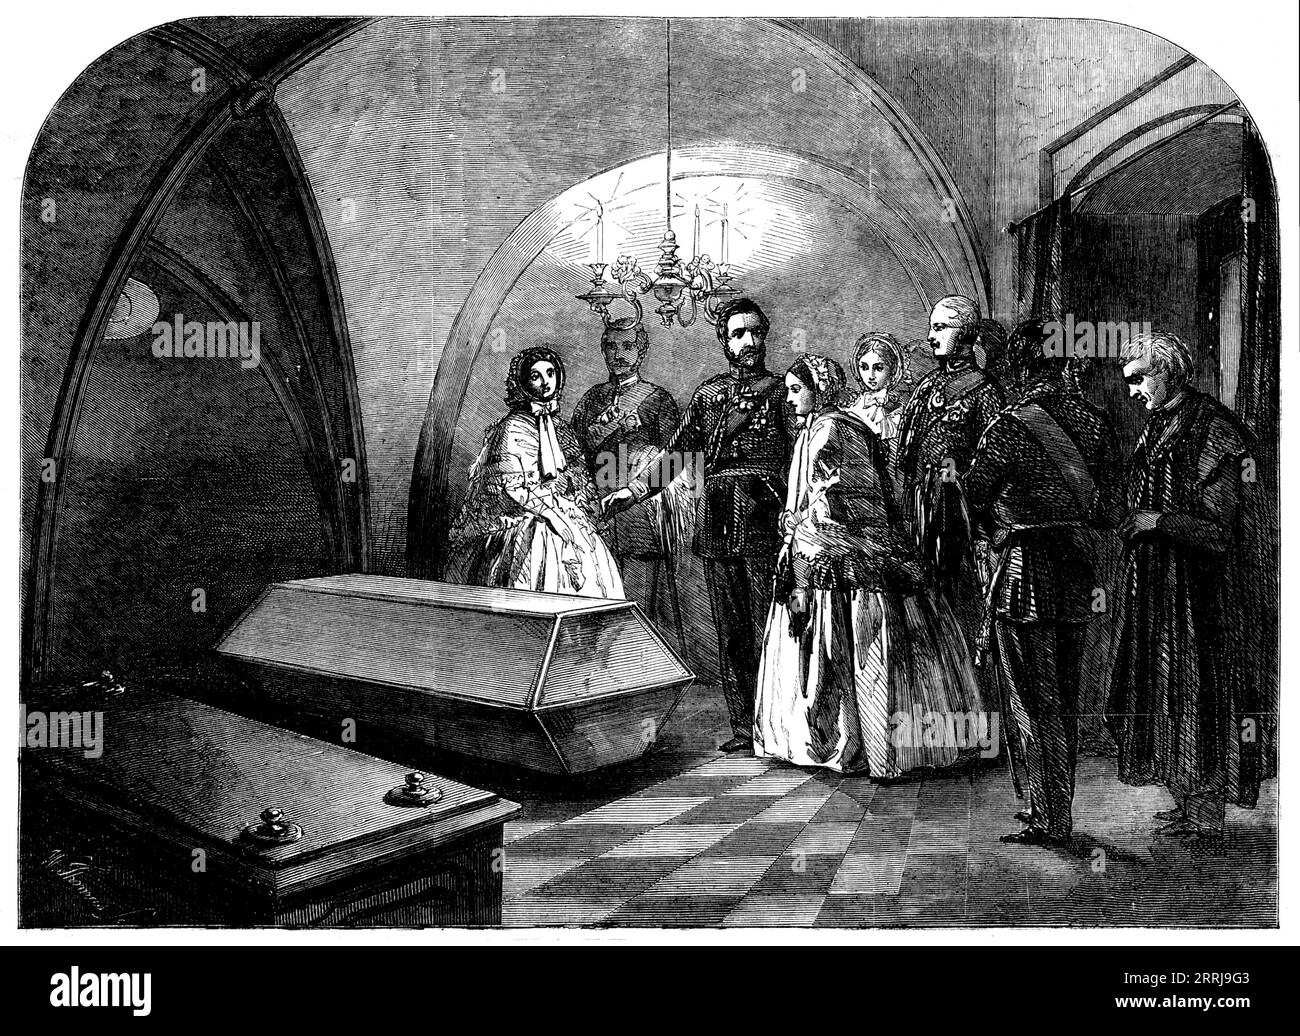 Queen Victoria Visiting the Tomb of Frederick the Great, 1858. 'Her Majesty and the Prince Consort, during their recent visit to Prussia, inspected the tomb of Frederick the Great. They were accompanied on the occasion by the Prince and Princess of Prussia, the Prince and Princess Frederick William, &amp;c. In our Engraving the Prince of Prussia is represented directing her Majesty's attention to the tomb; to his right are the Prince and Princess Frederick William; immediately behind the Queen is Prince Albert; and at his side is the Princess of Prussia...The remains of Frederick the Great lie Stock Photo